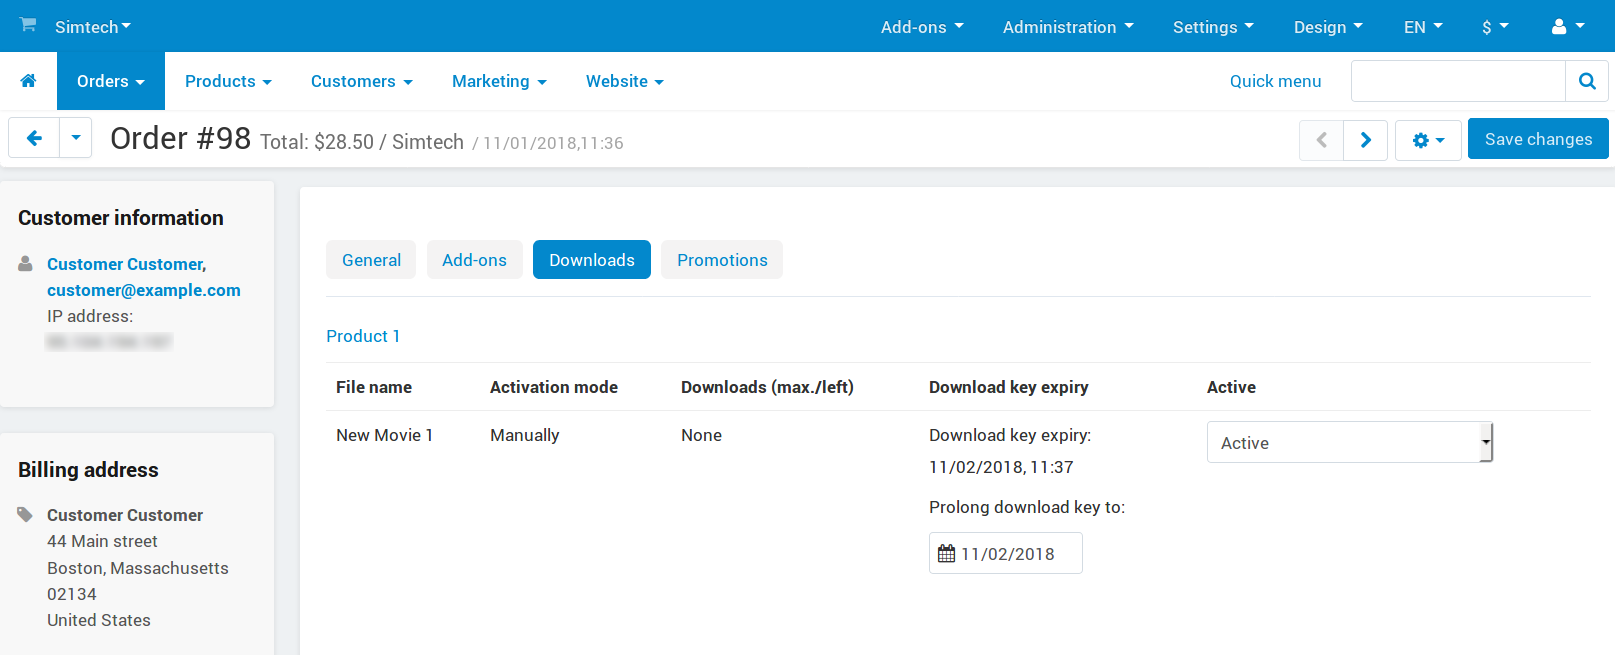 Downloadable files among other order information in the admin panel.